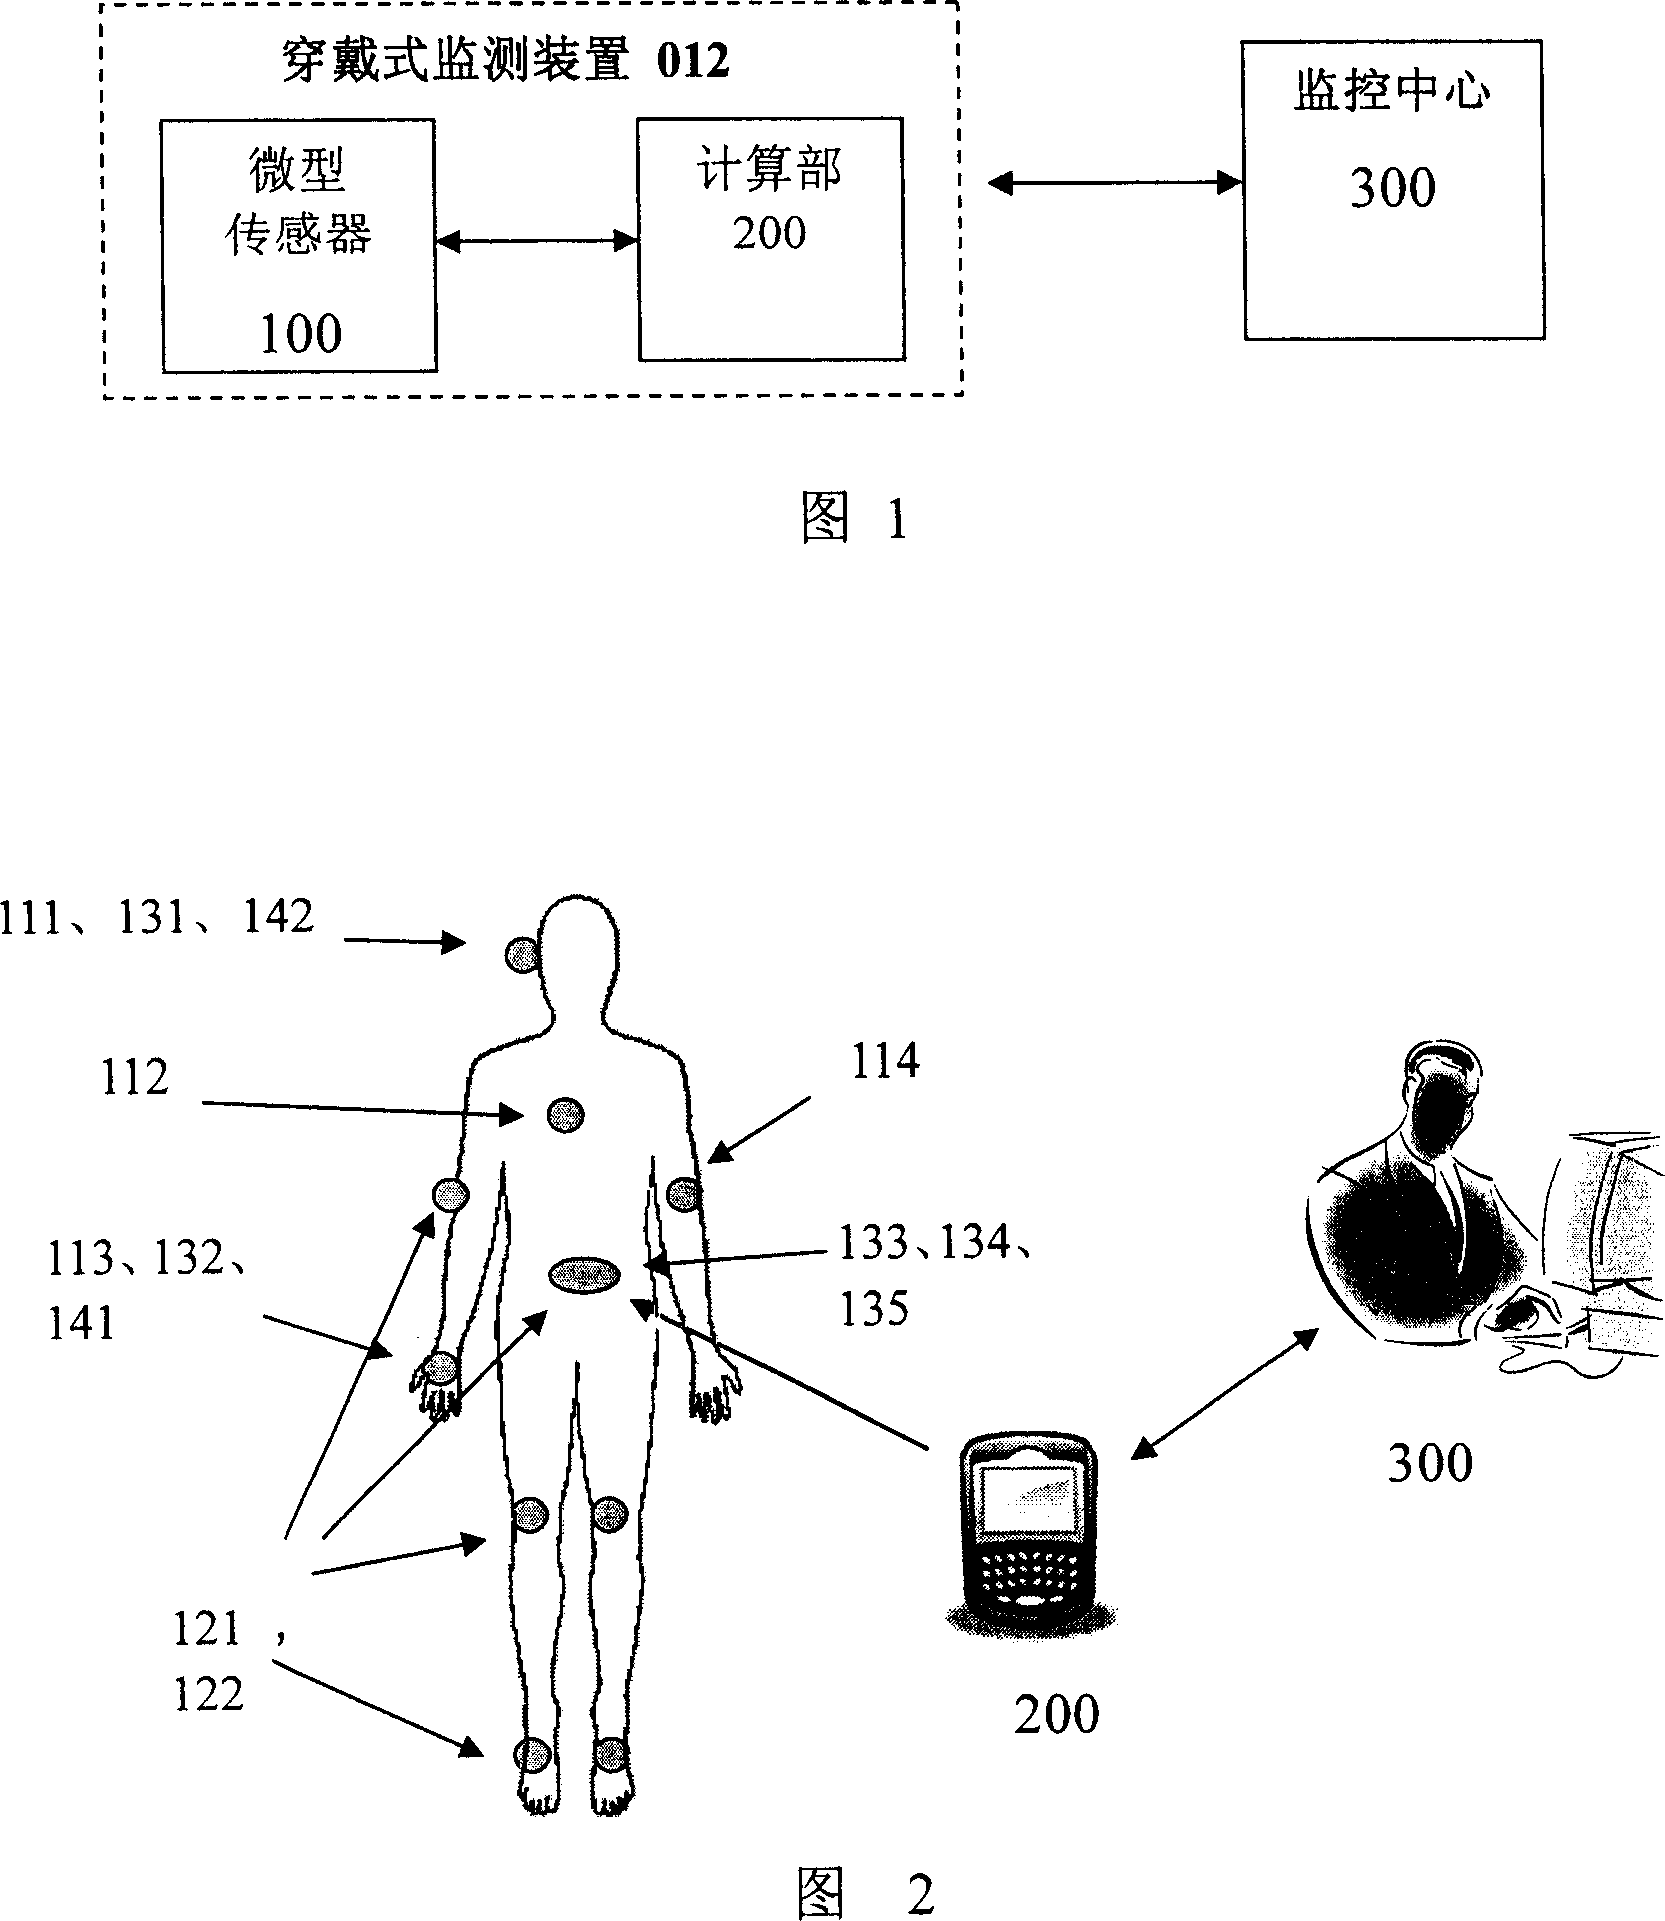 Dynamic monitoring system of body sign